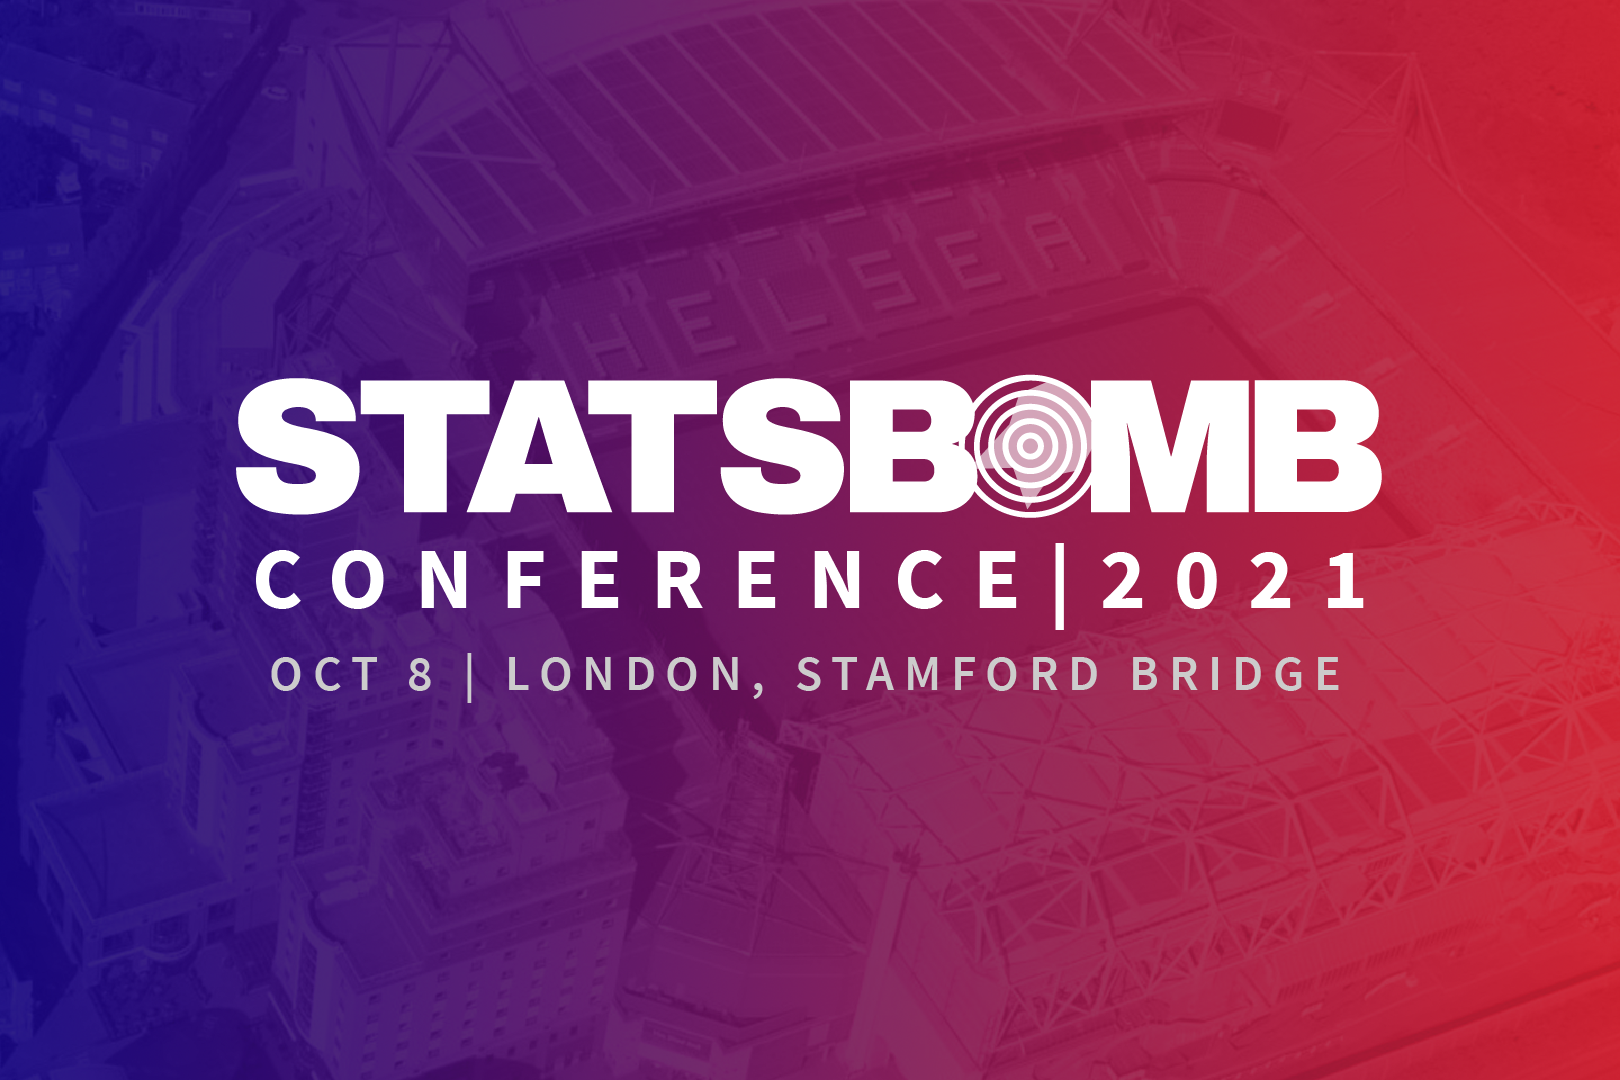 StatsBomb Conference 2021: Speakers, Panels, Research Paper Winners, and more...